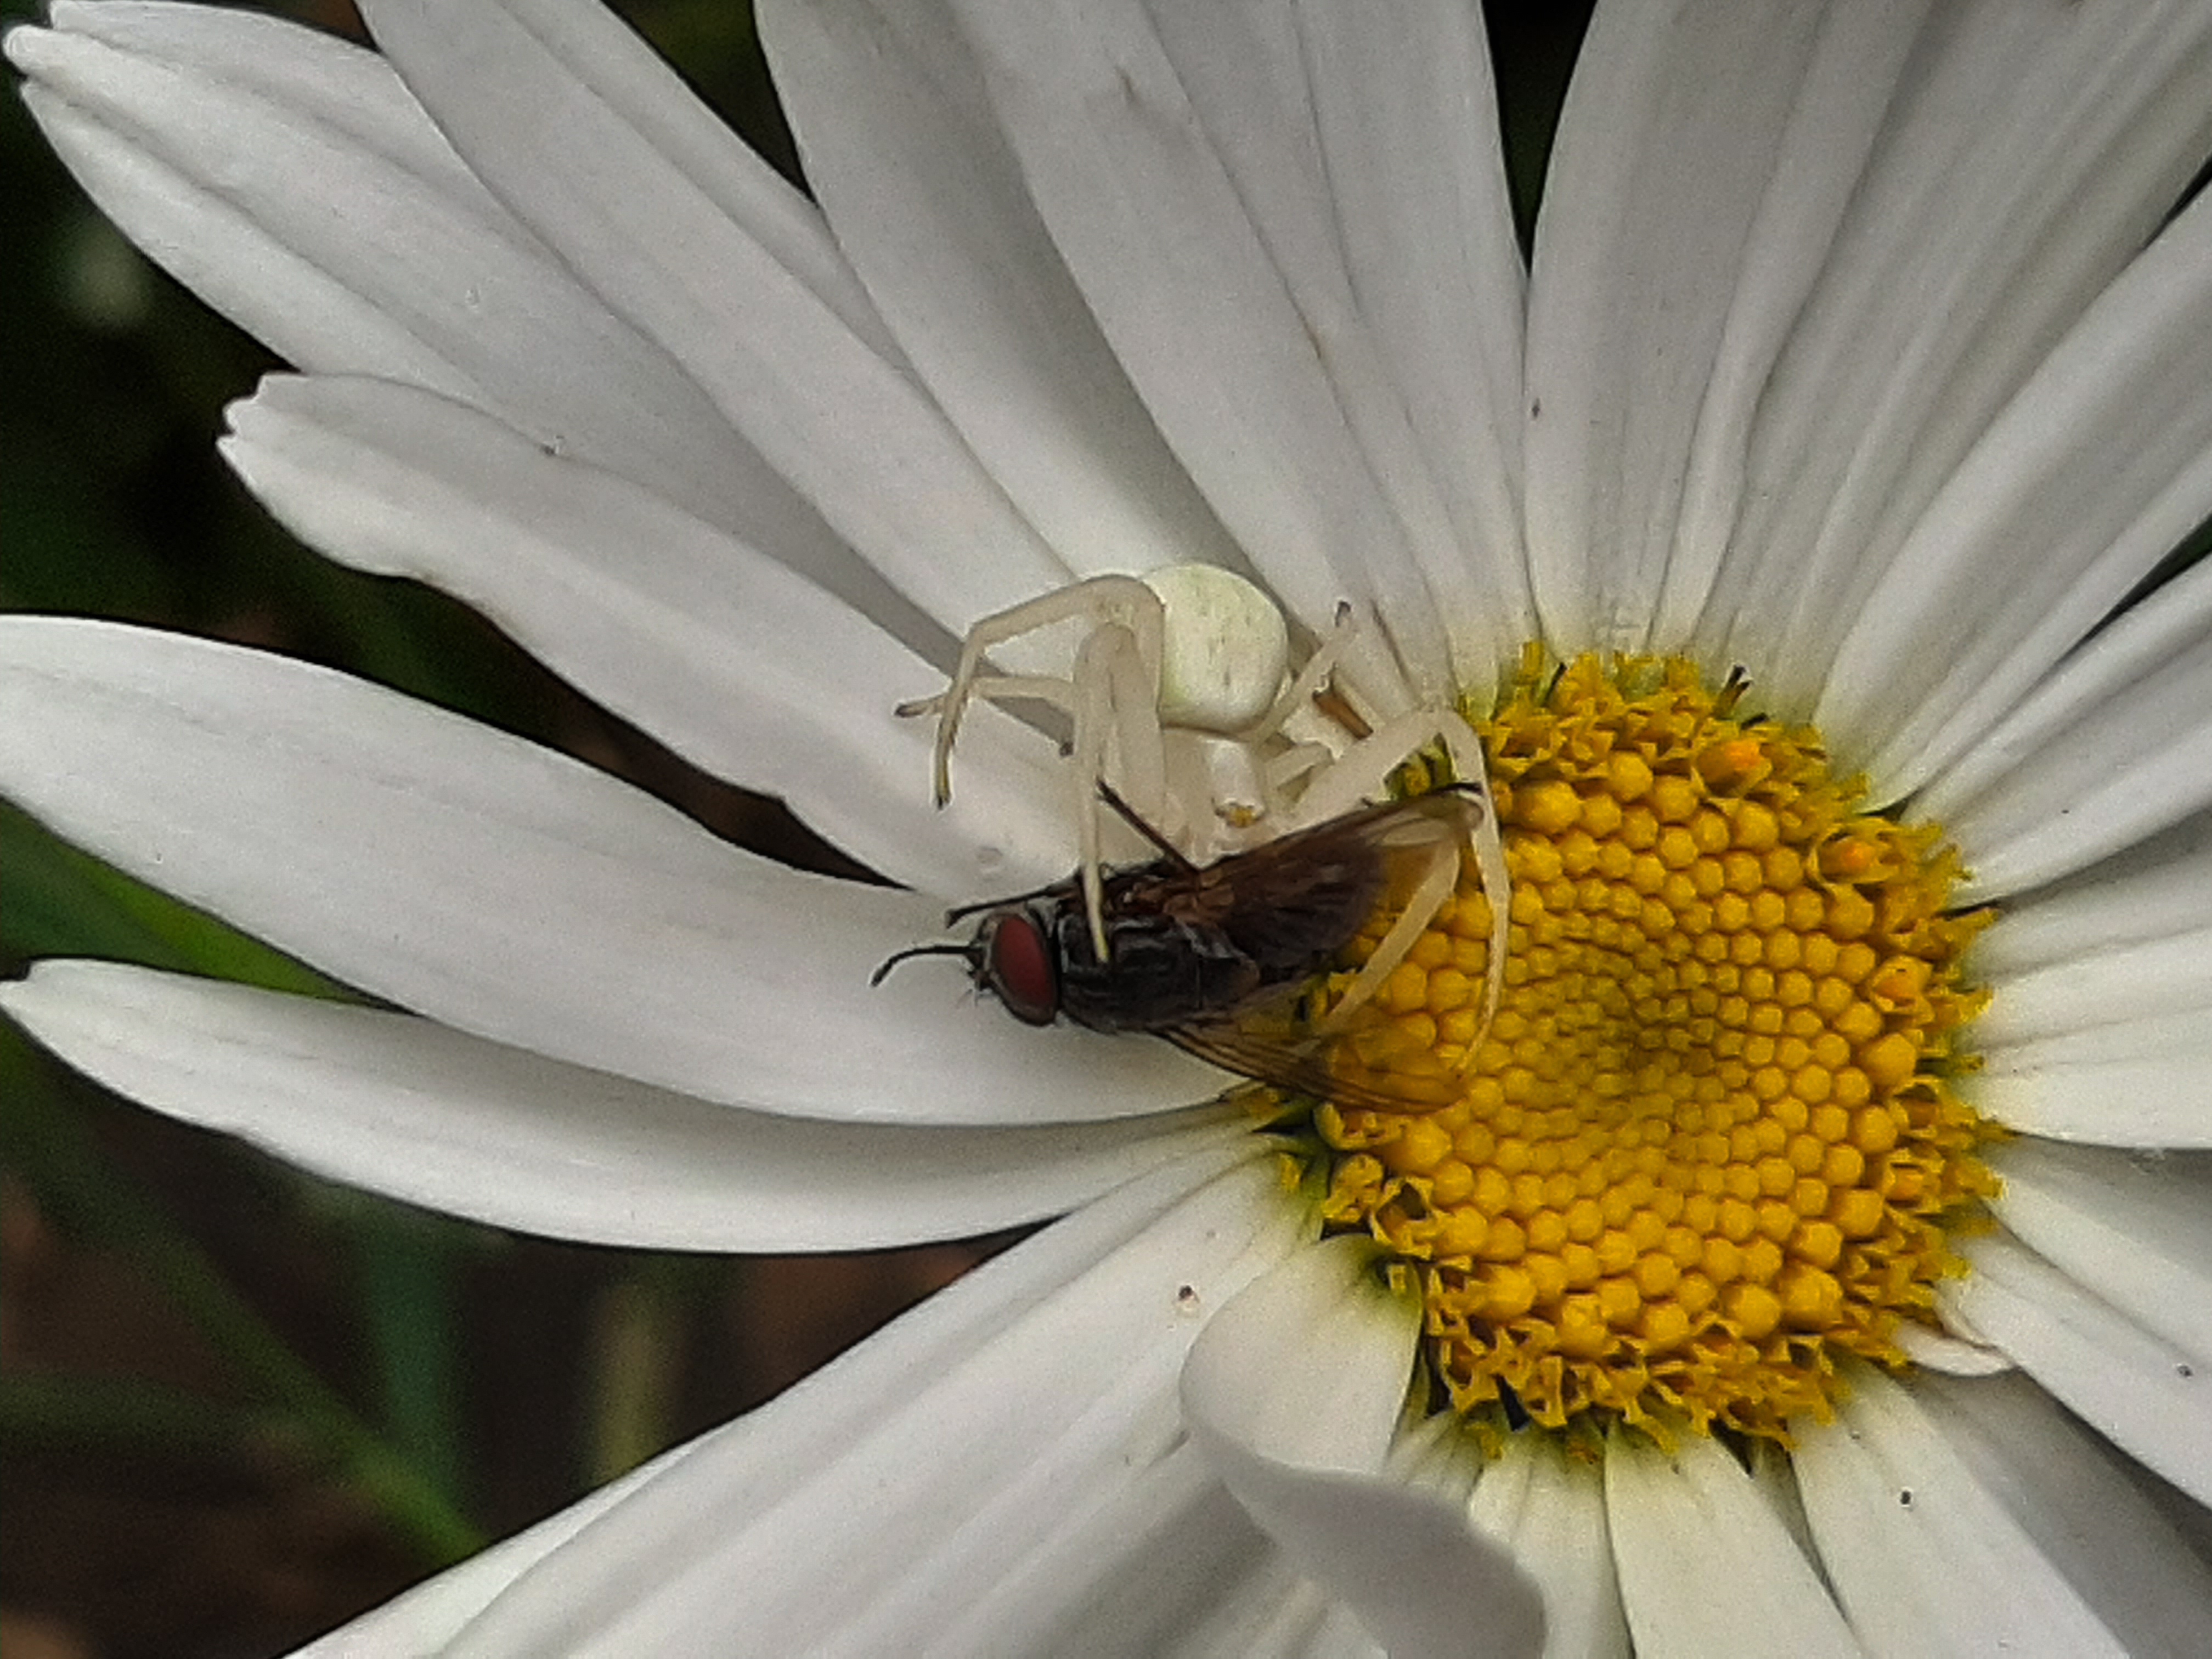 A white spider eats a fly on a daisy flower